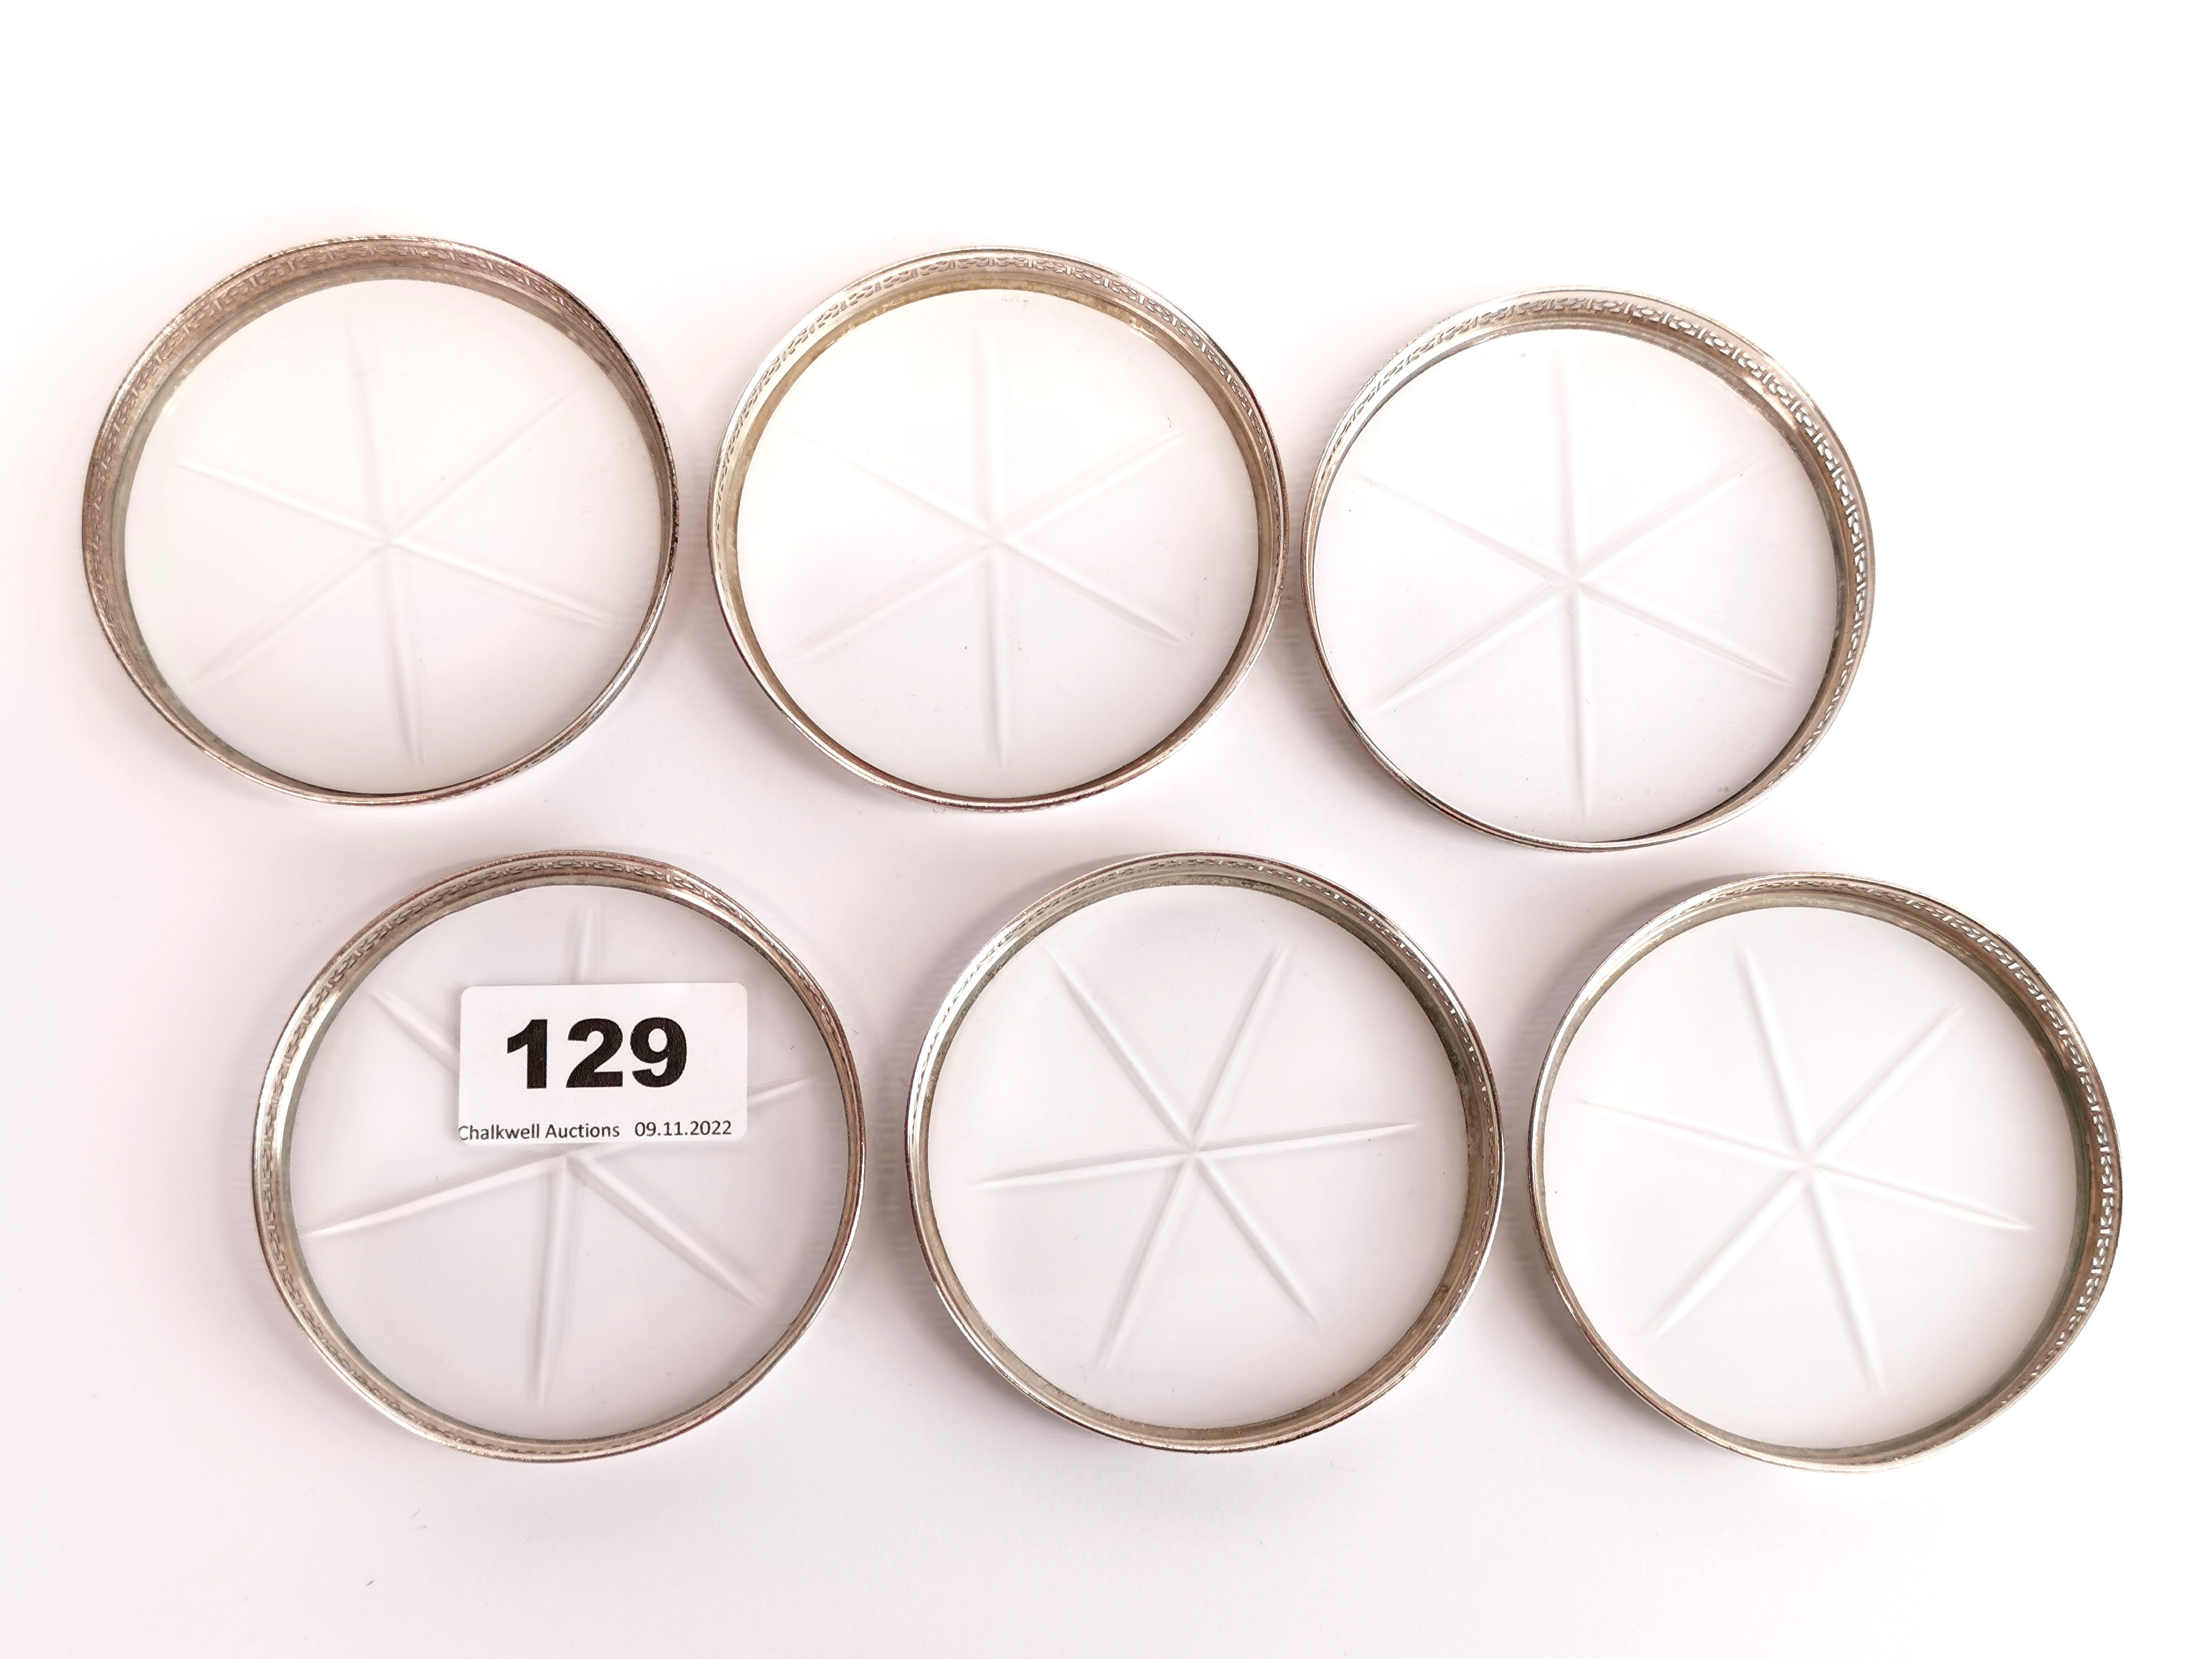 A set of six sterling silver mounted and cut glass coasters, Dia. 8cm. - Image 2 of 2